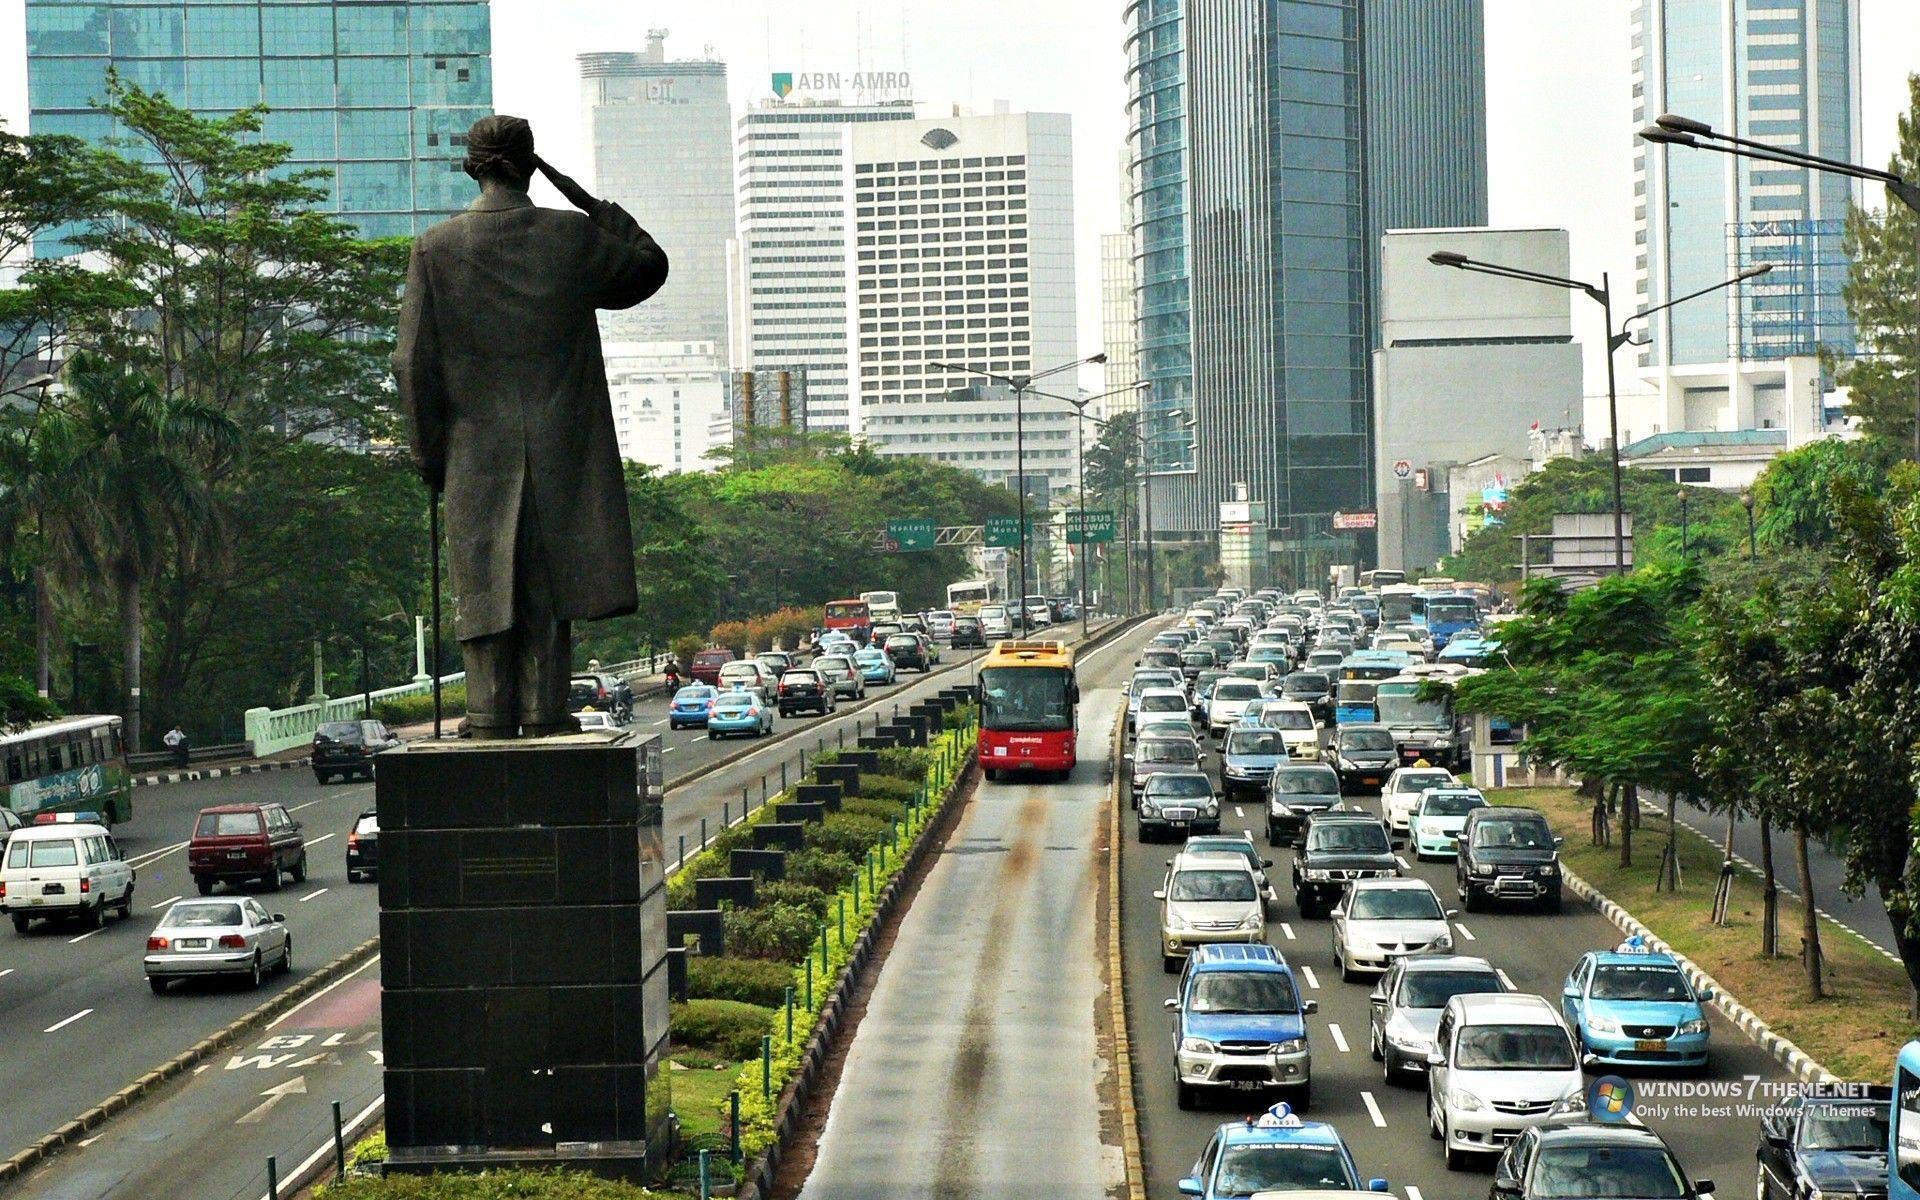 Jakarta City wallpaper and image, picture, photo